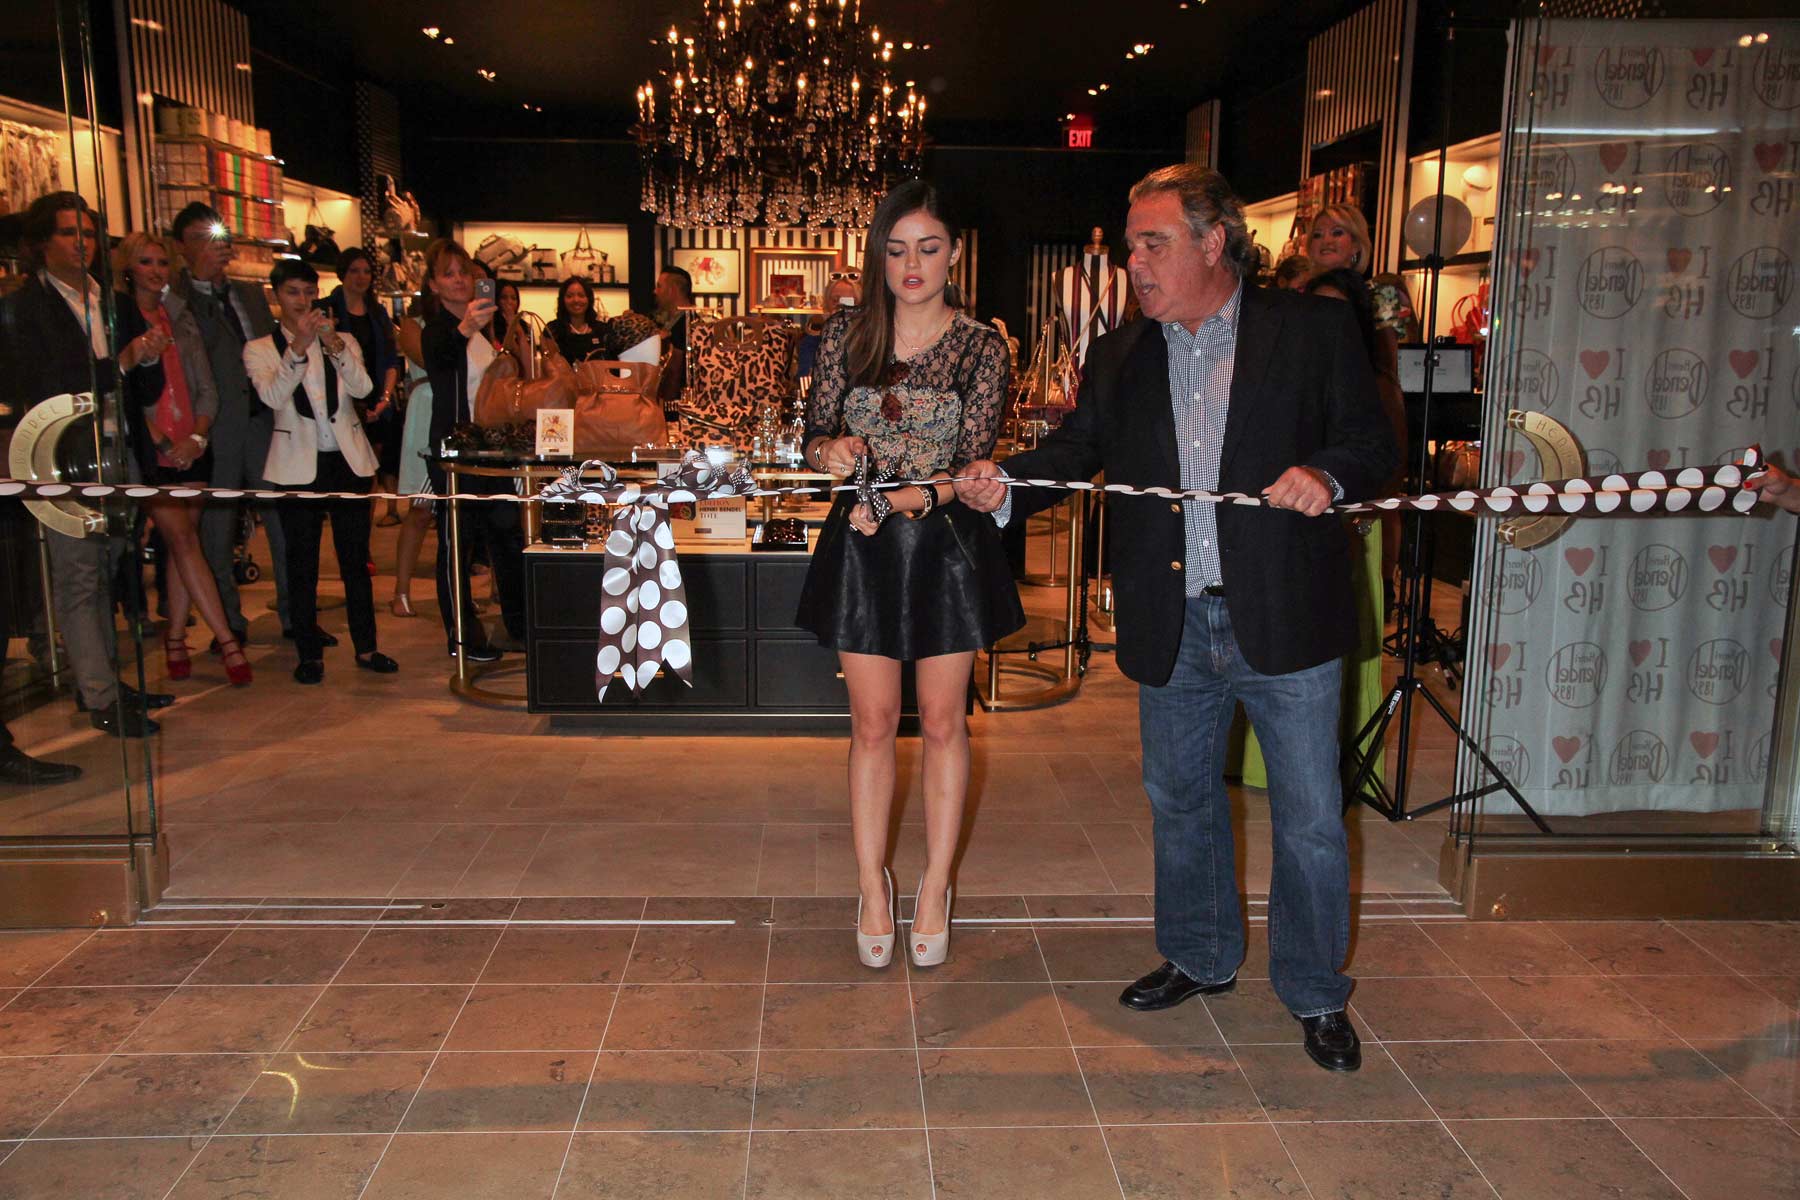 Lucy Hale attends the Fashion Show Mall